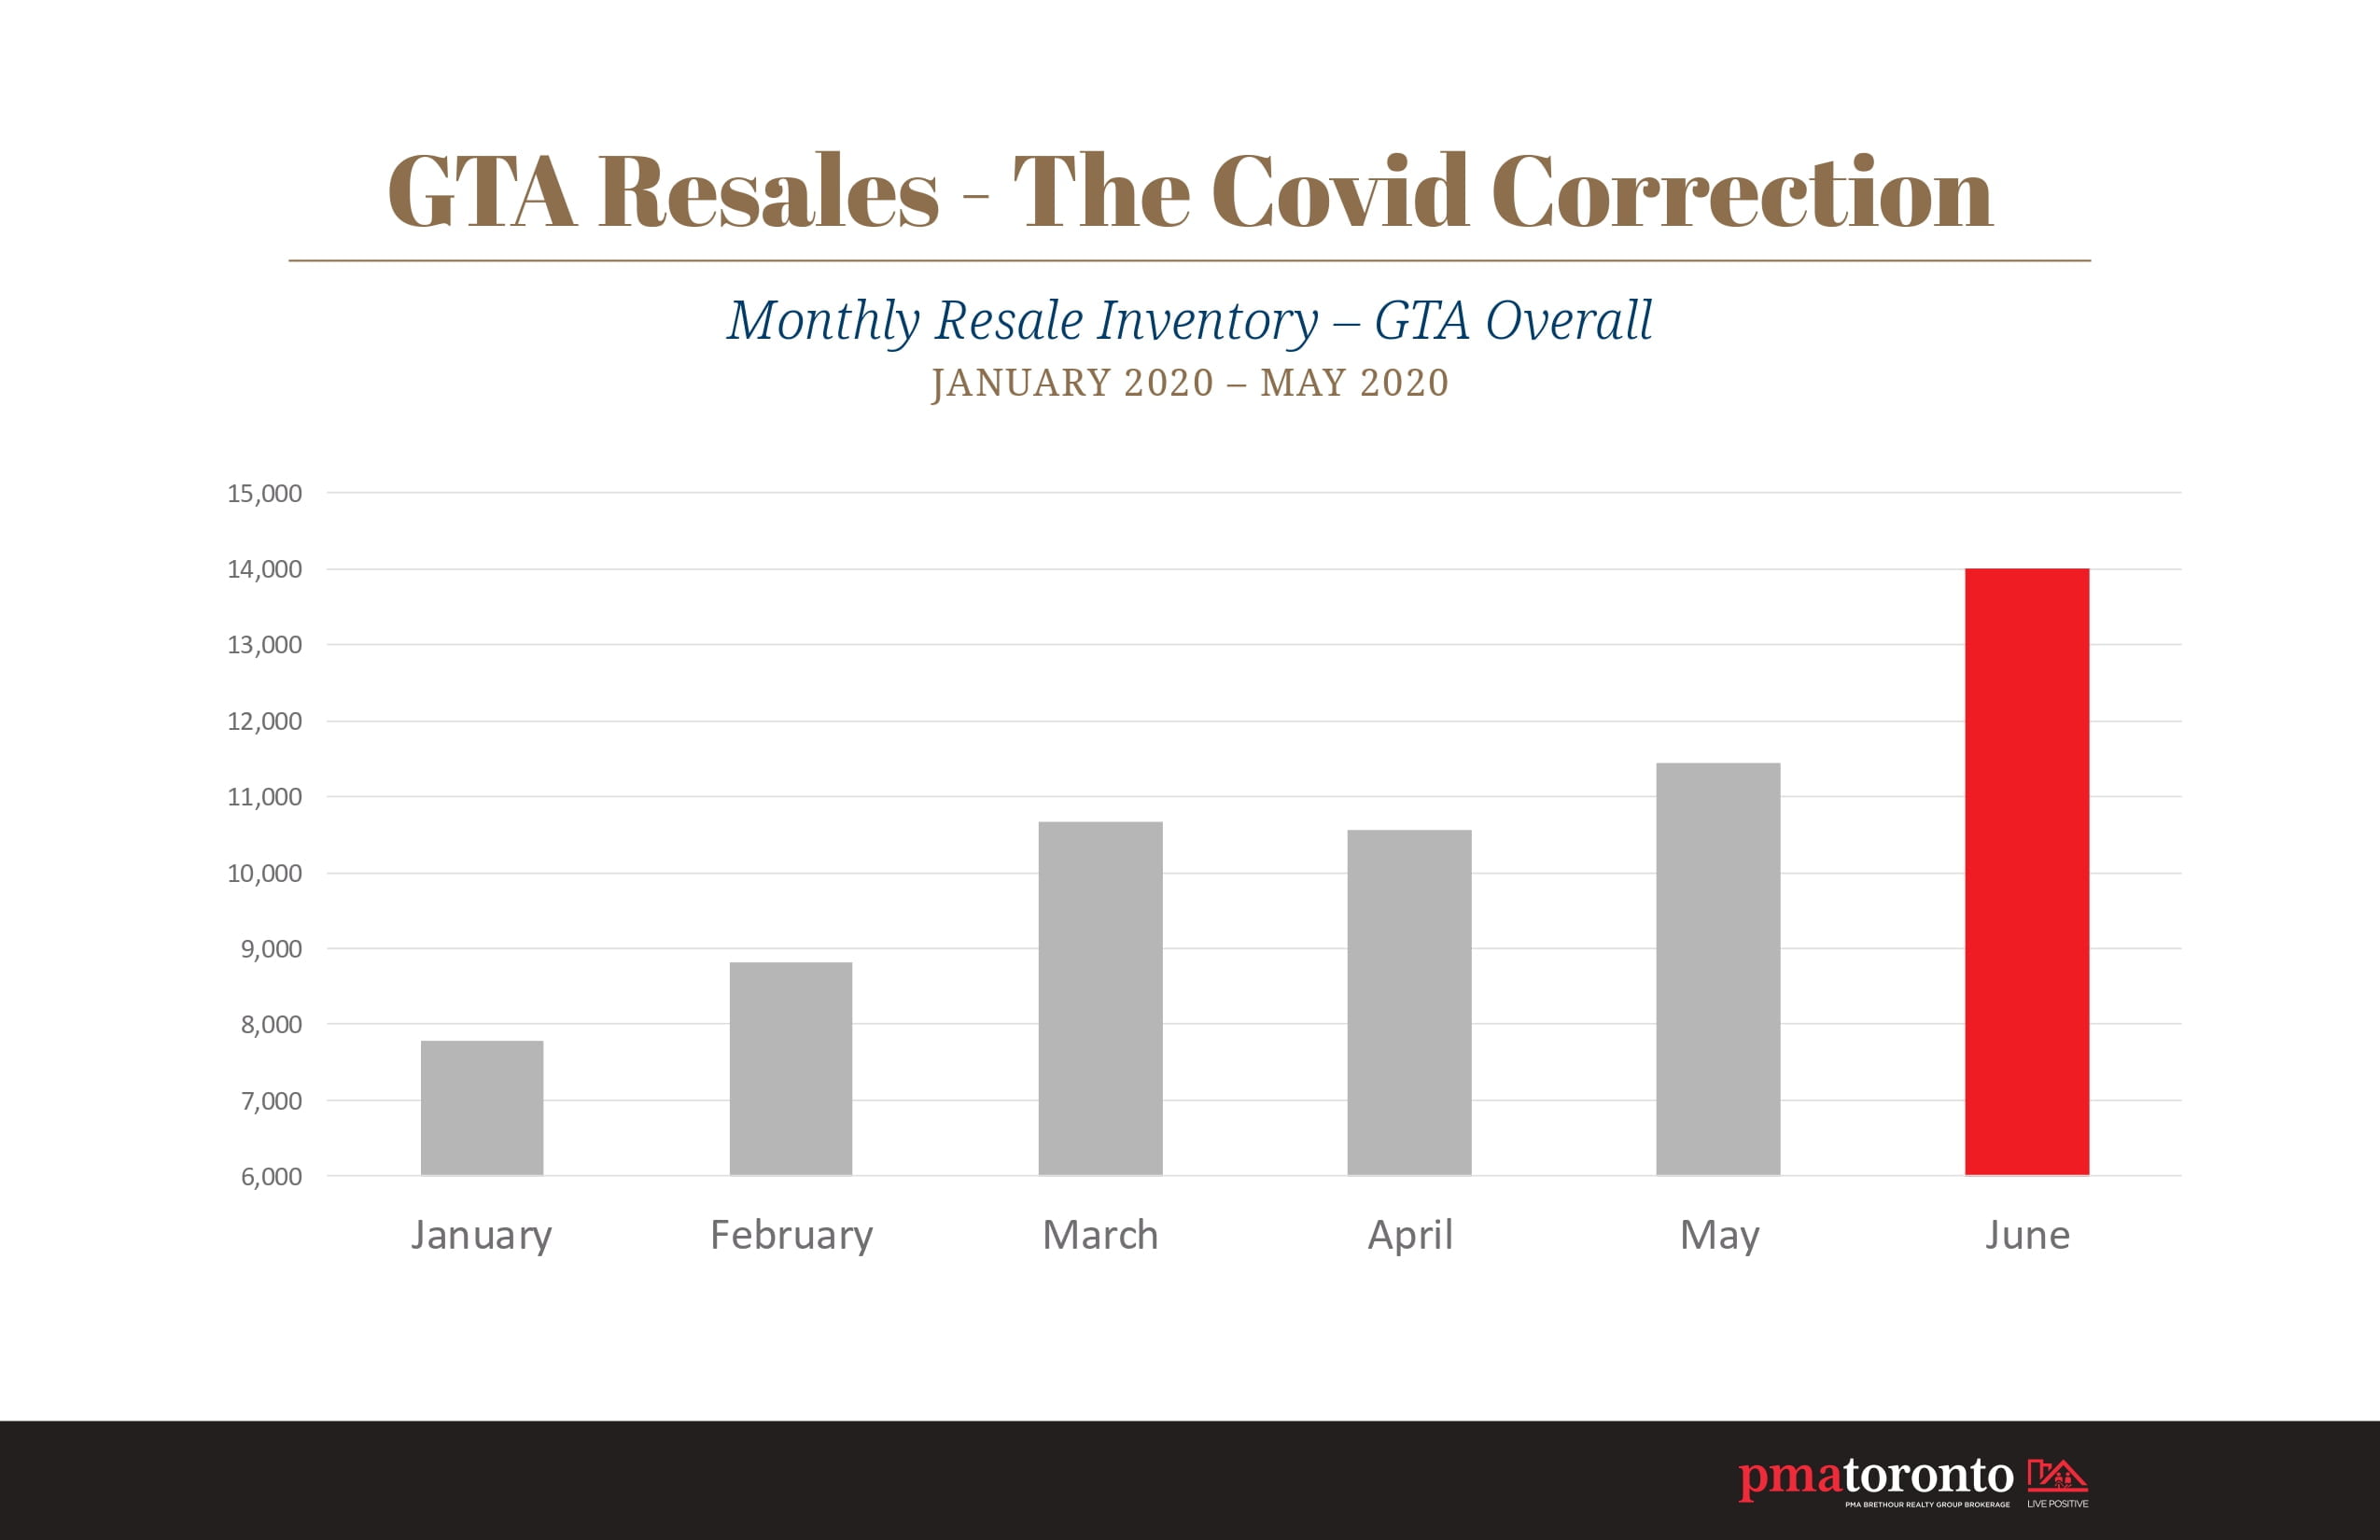 Infographic - GTA Real Estate Resale Inventory - January to June 2020